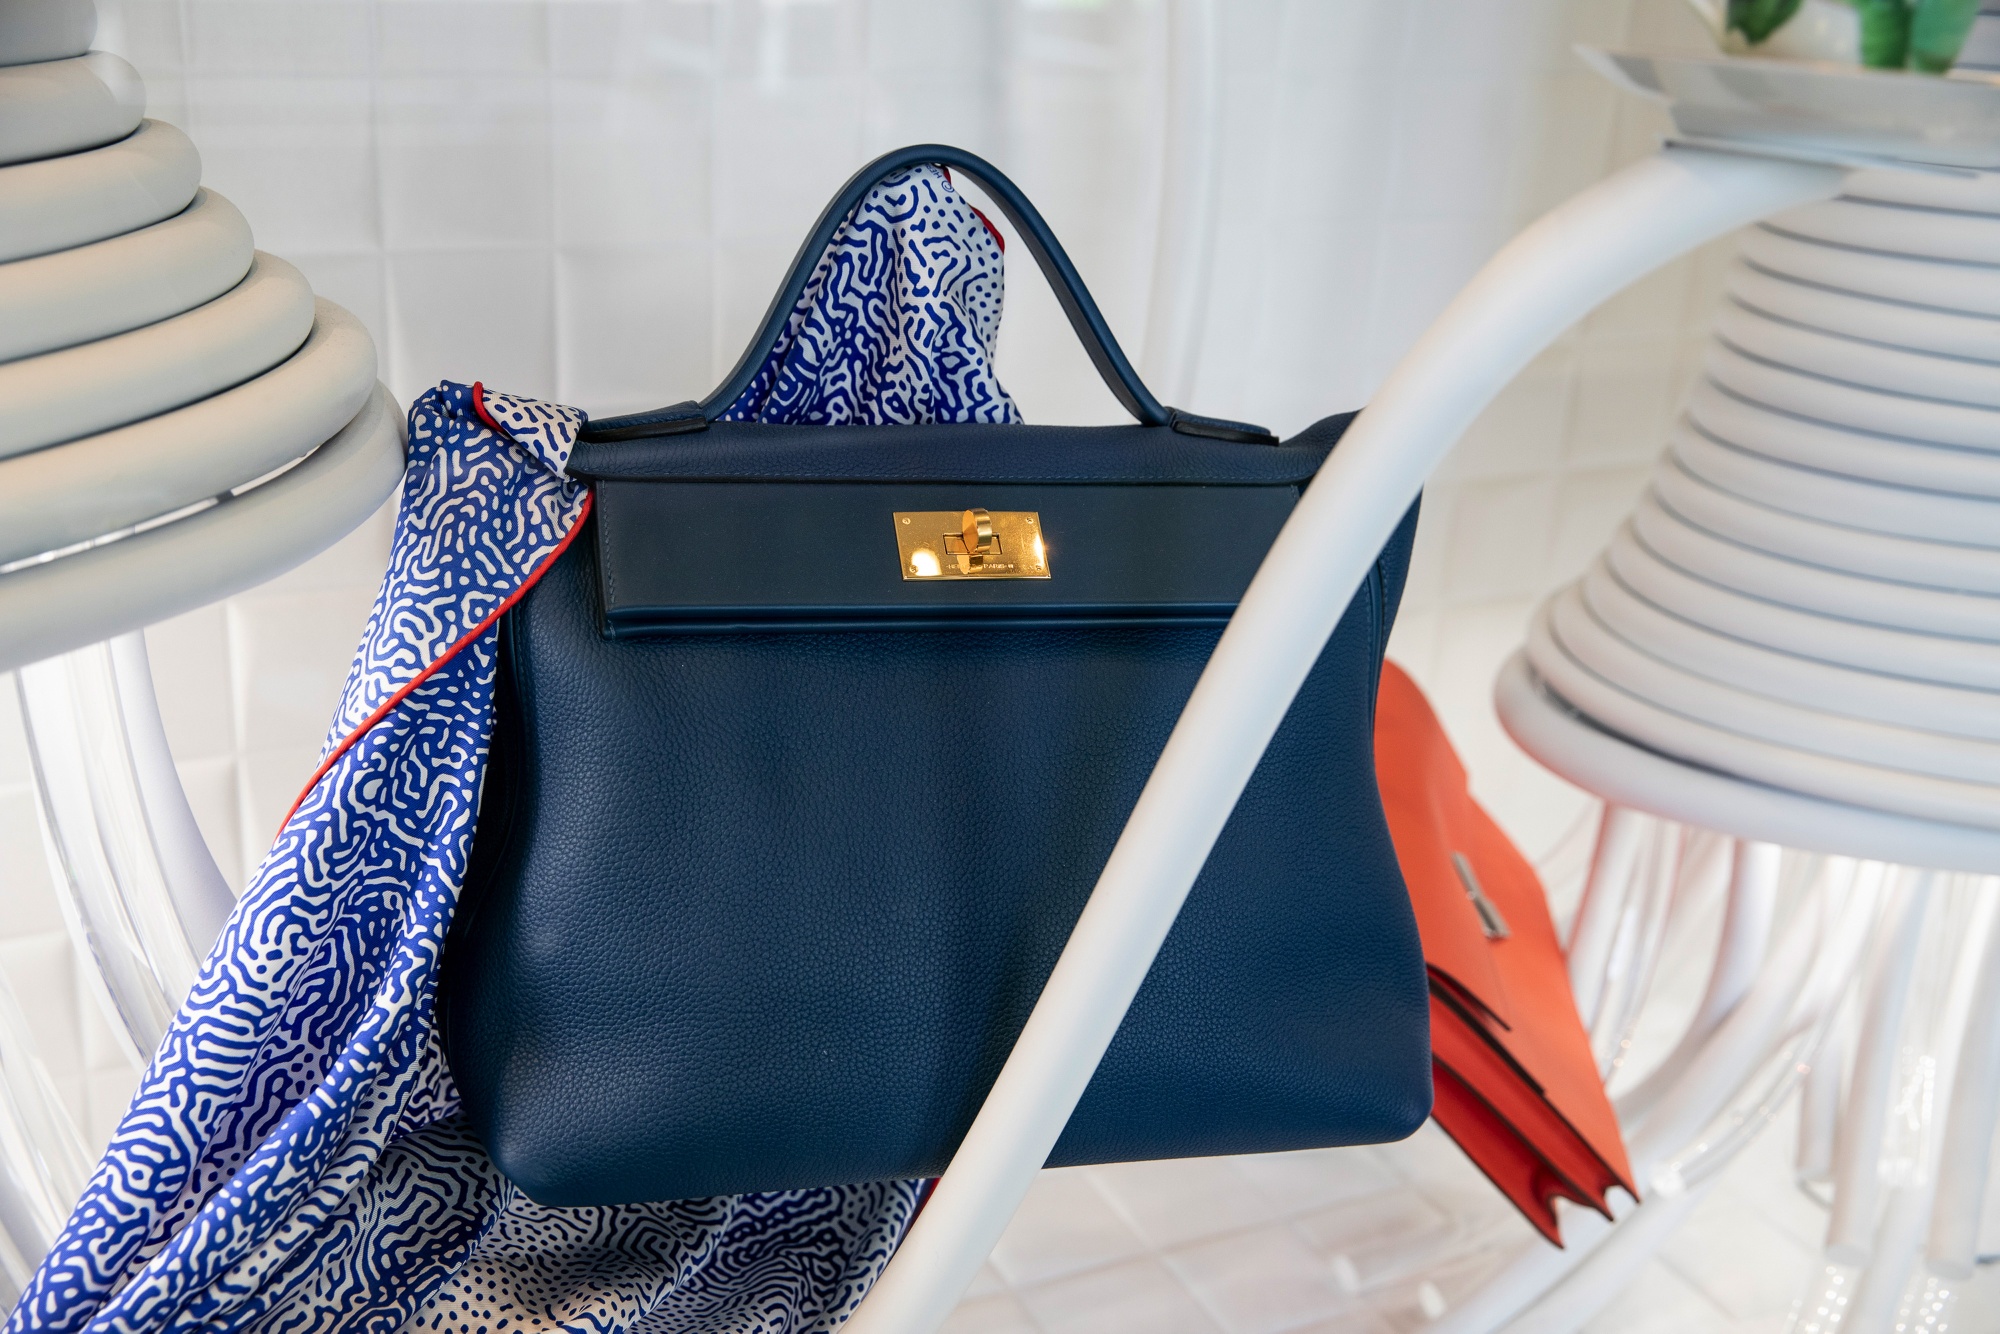 Demand for Hermes bags is booming despite the pandemic